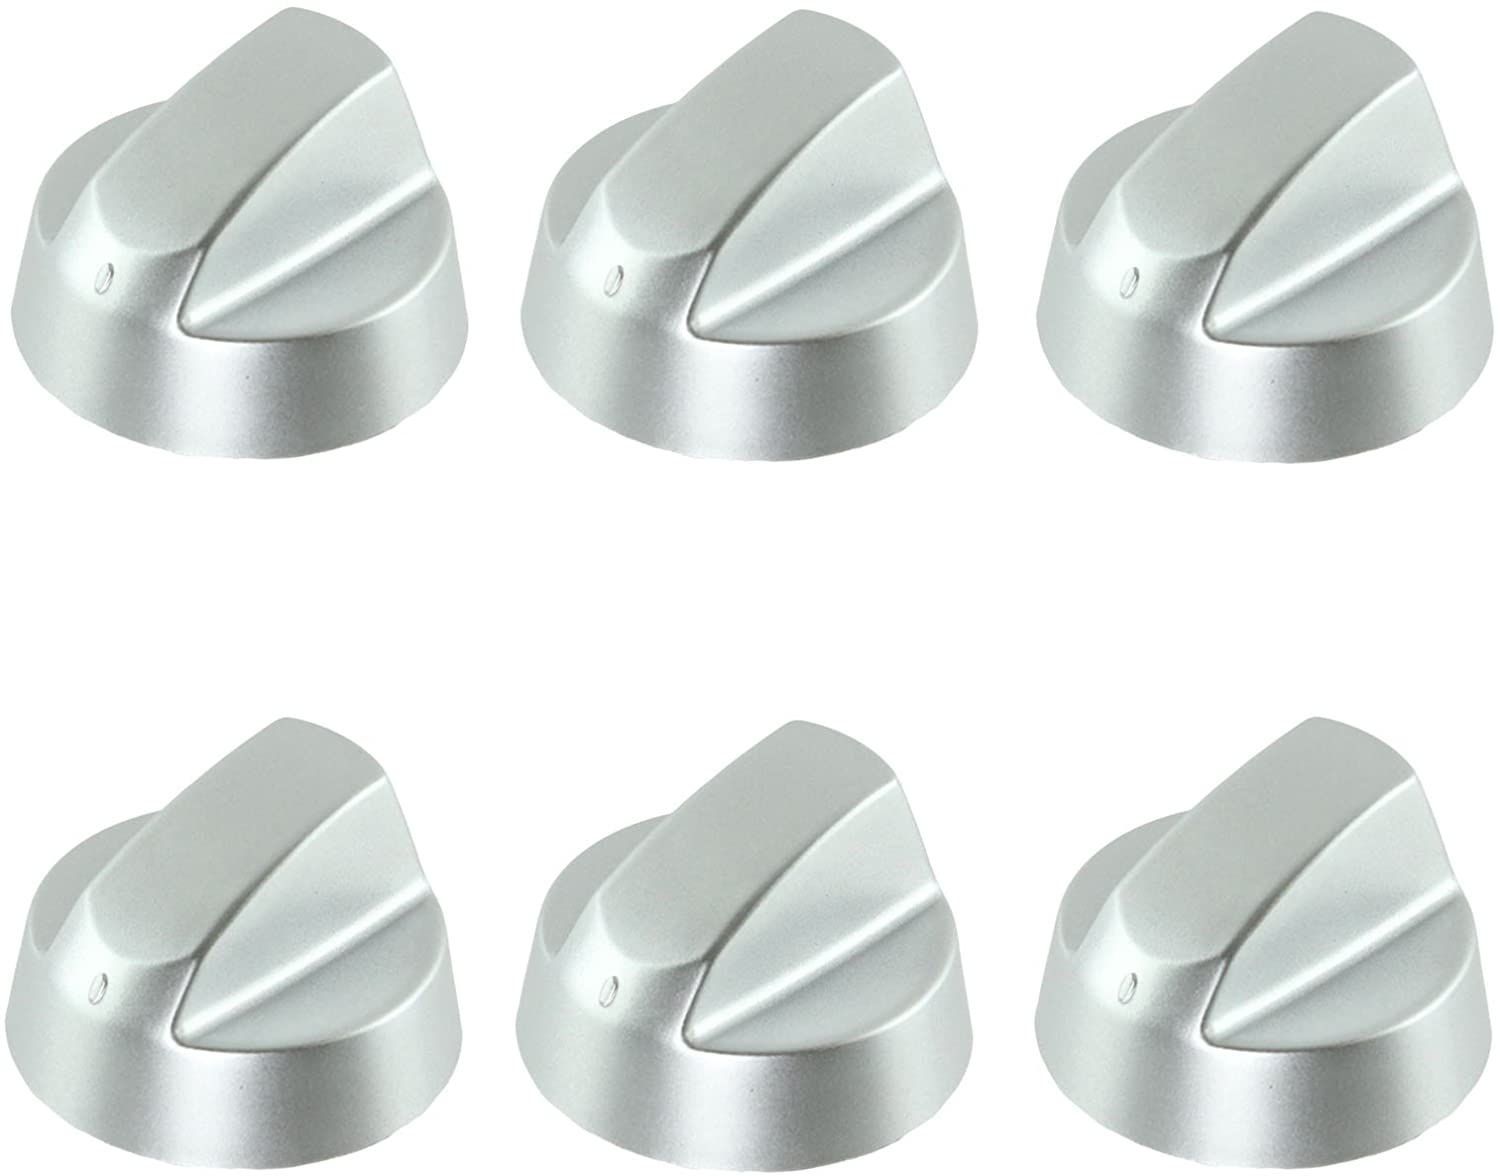 Control Knob Dial & Adaptors for HOTPOINT Oven / Cooker (Silver, Pack of 6)